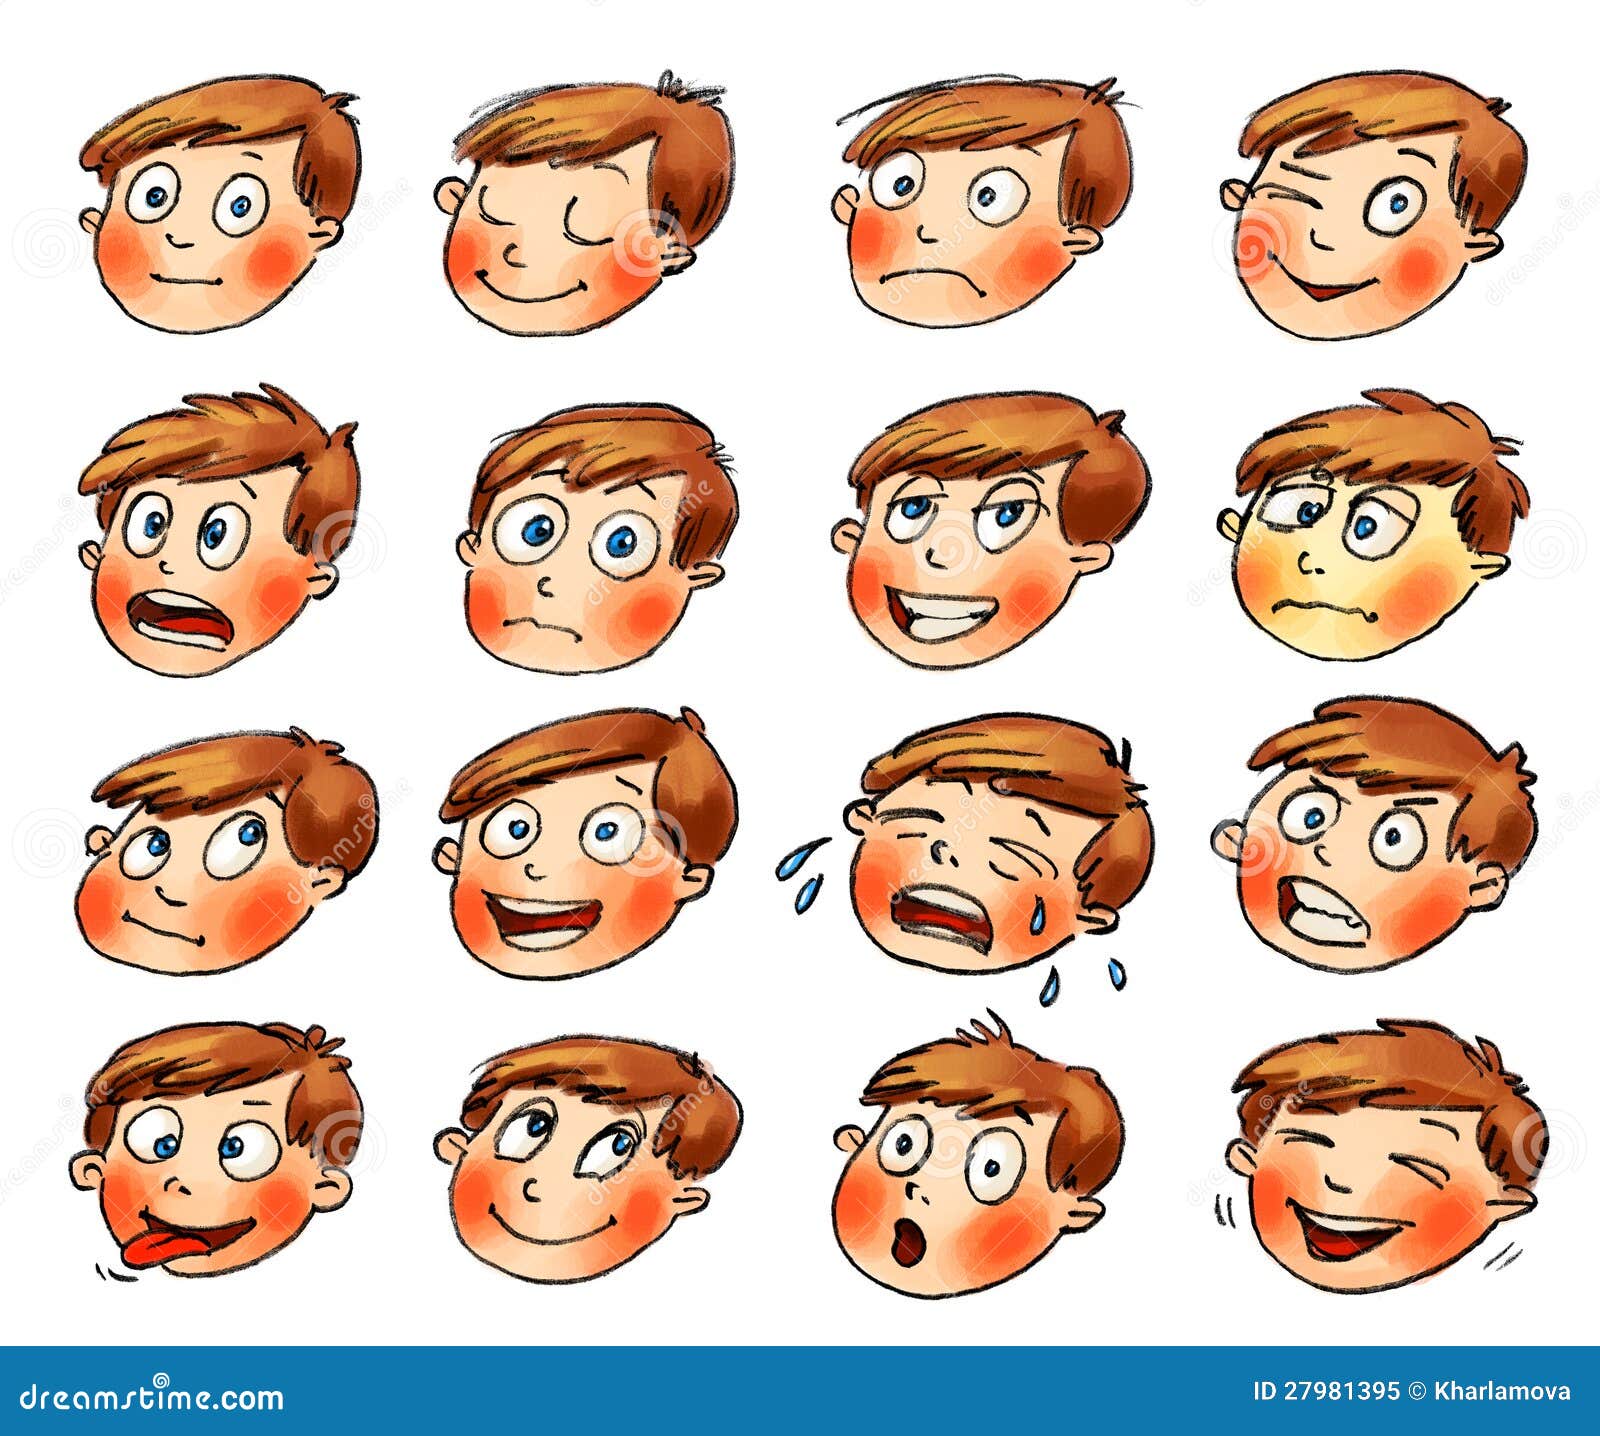 clipart expression emotions - photo #20